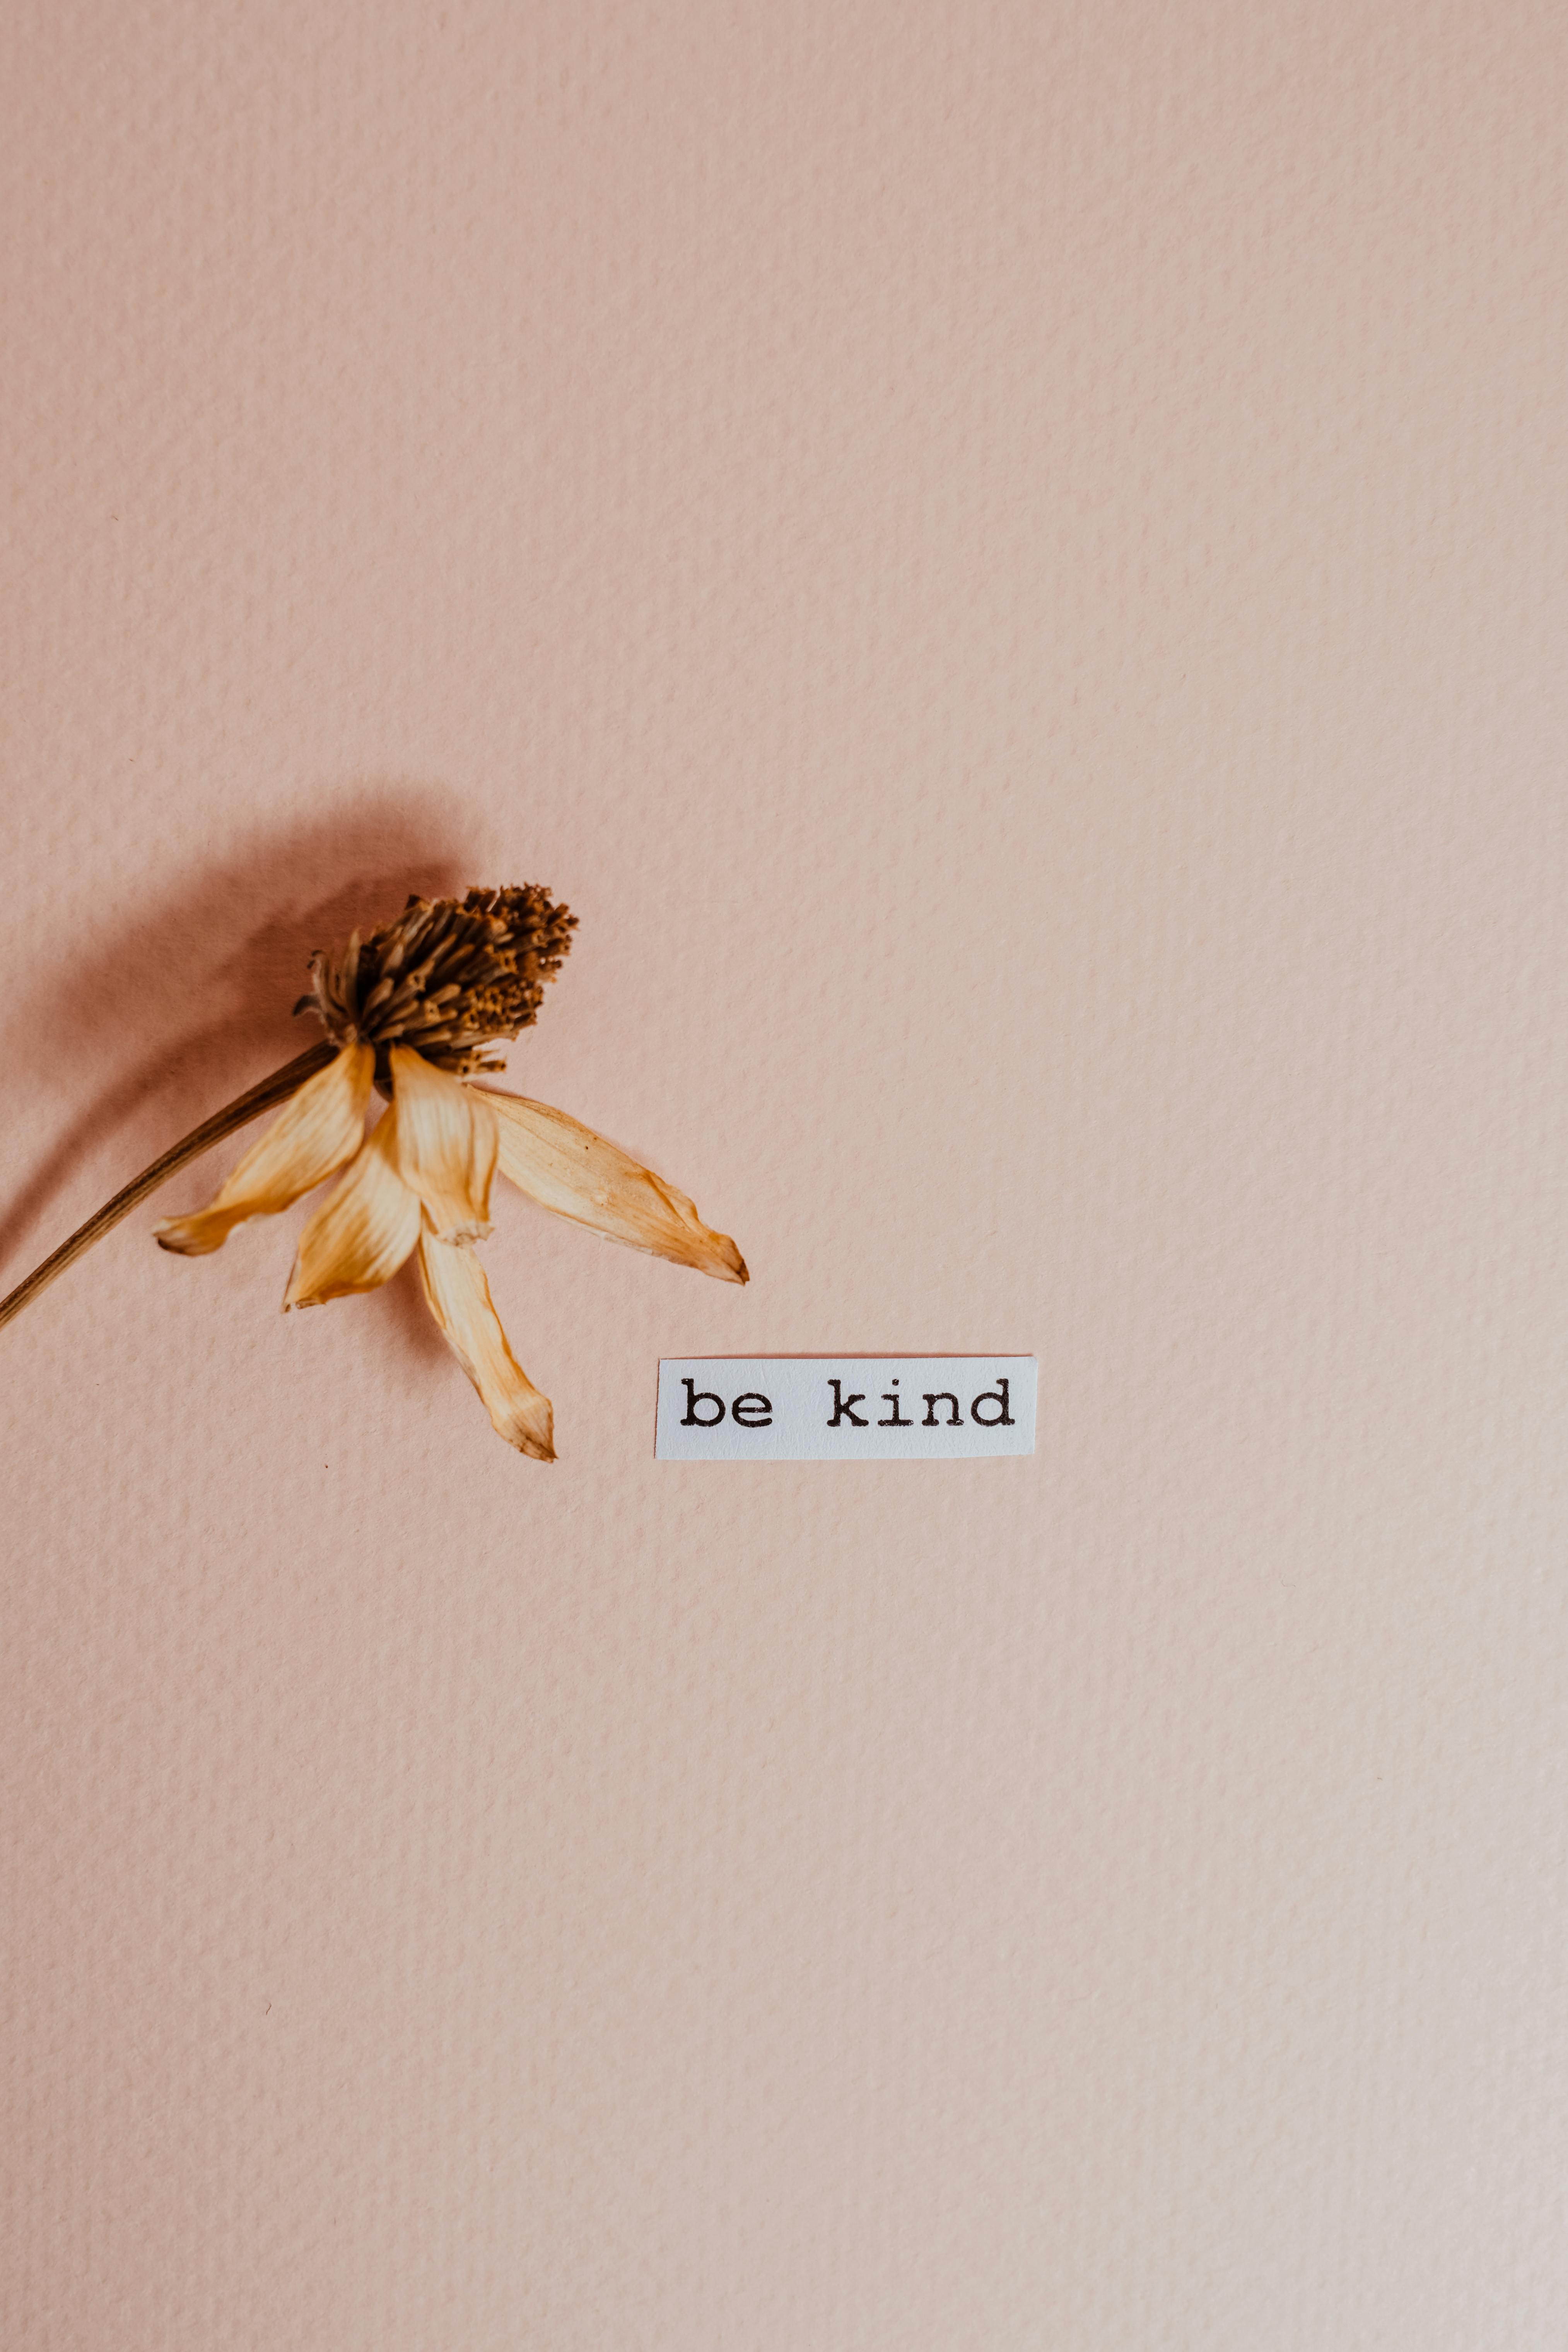 100 Kindness Pictures  Wallpaperscom